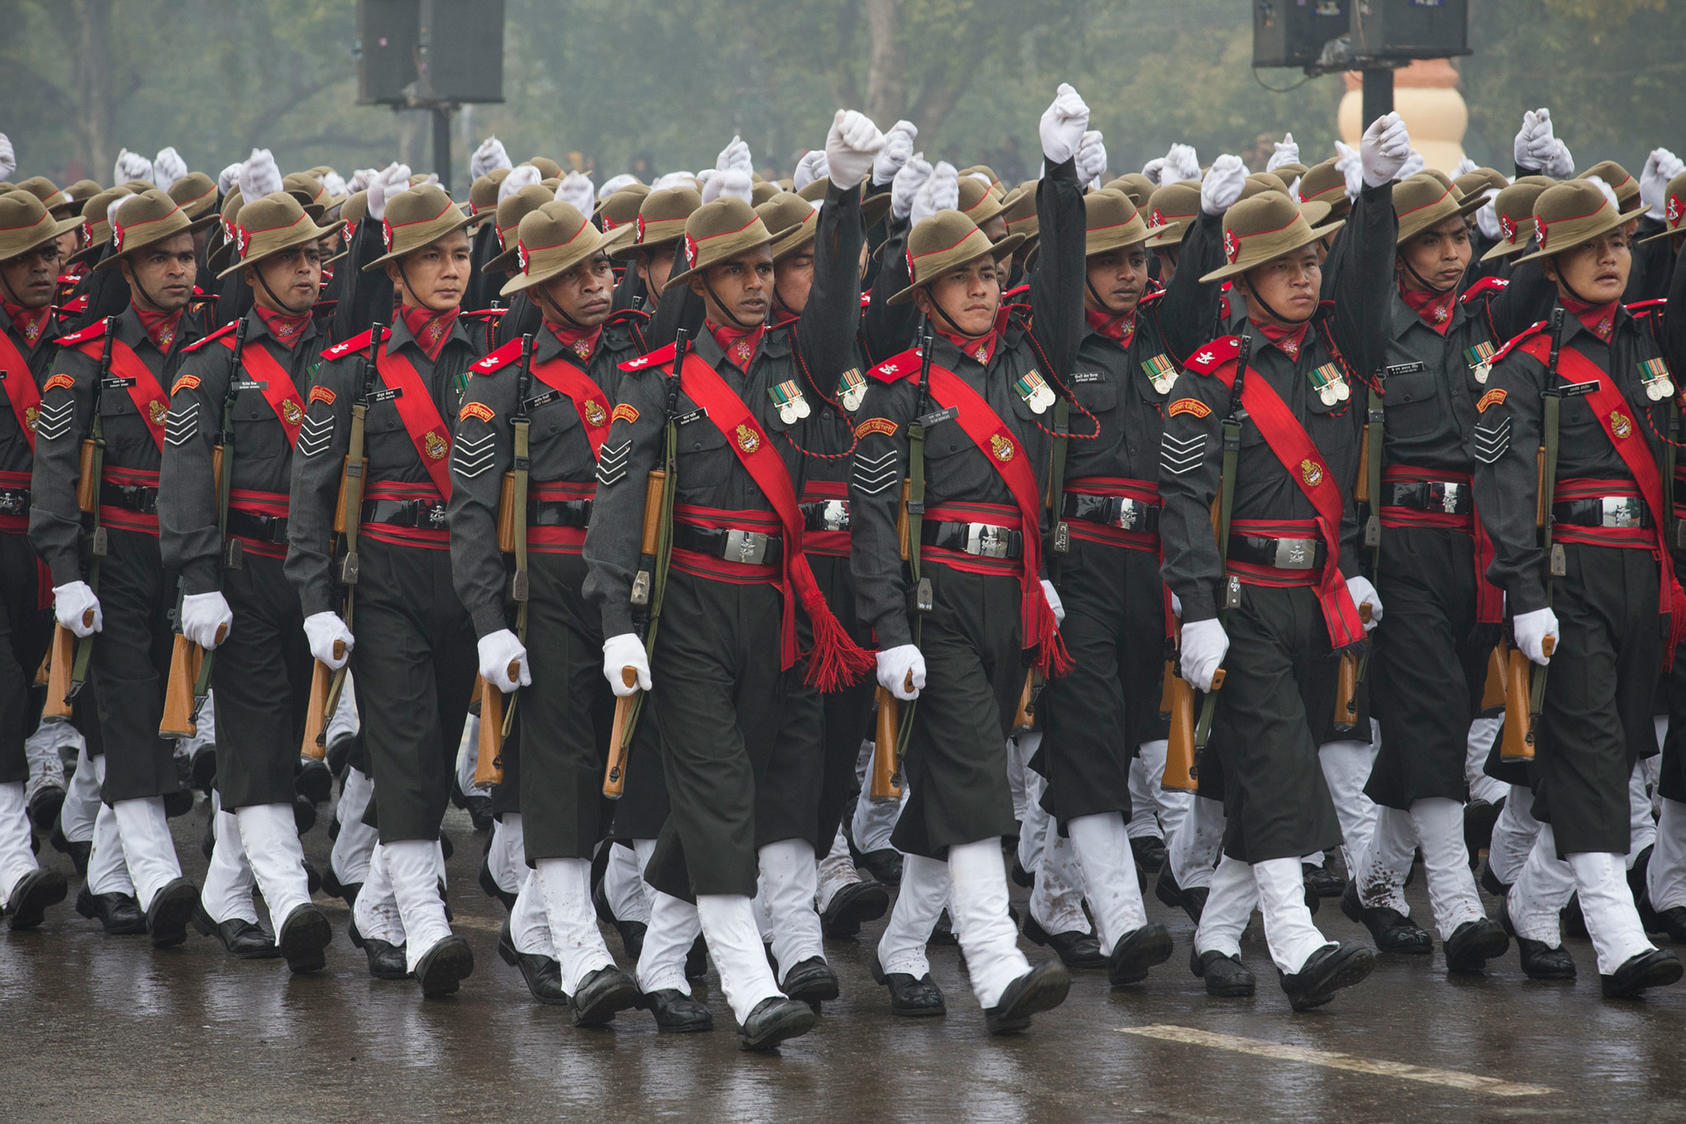 Soldiers during India's Republic Day parade in New Delhi, Jan. 26, 2015. (Stephen Crowley/The New York Times)